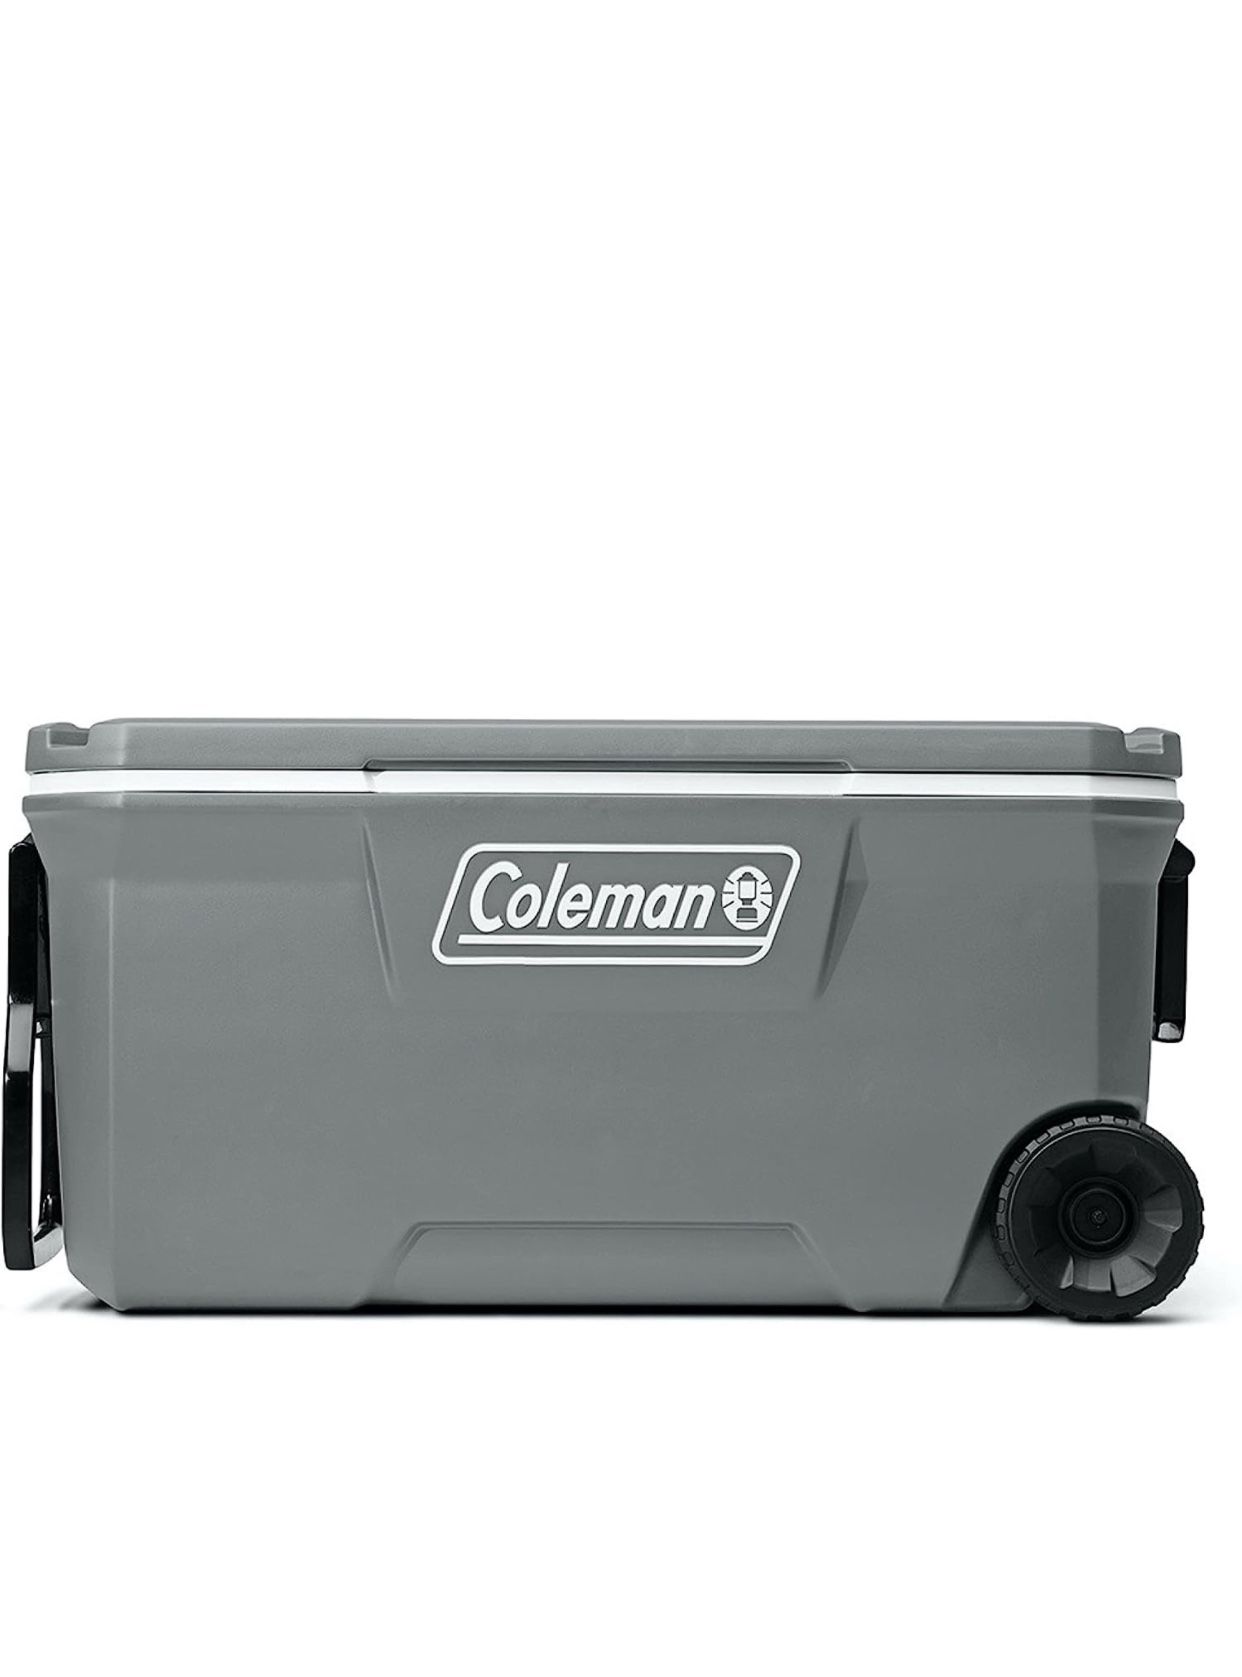 Coleman 316 Series Insulated Portable Cooler 62 Qts